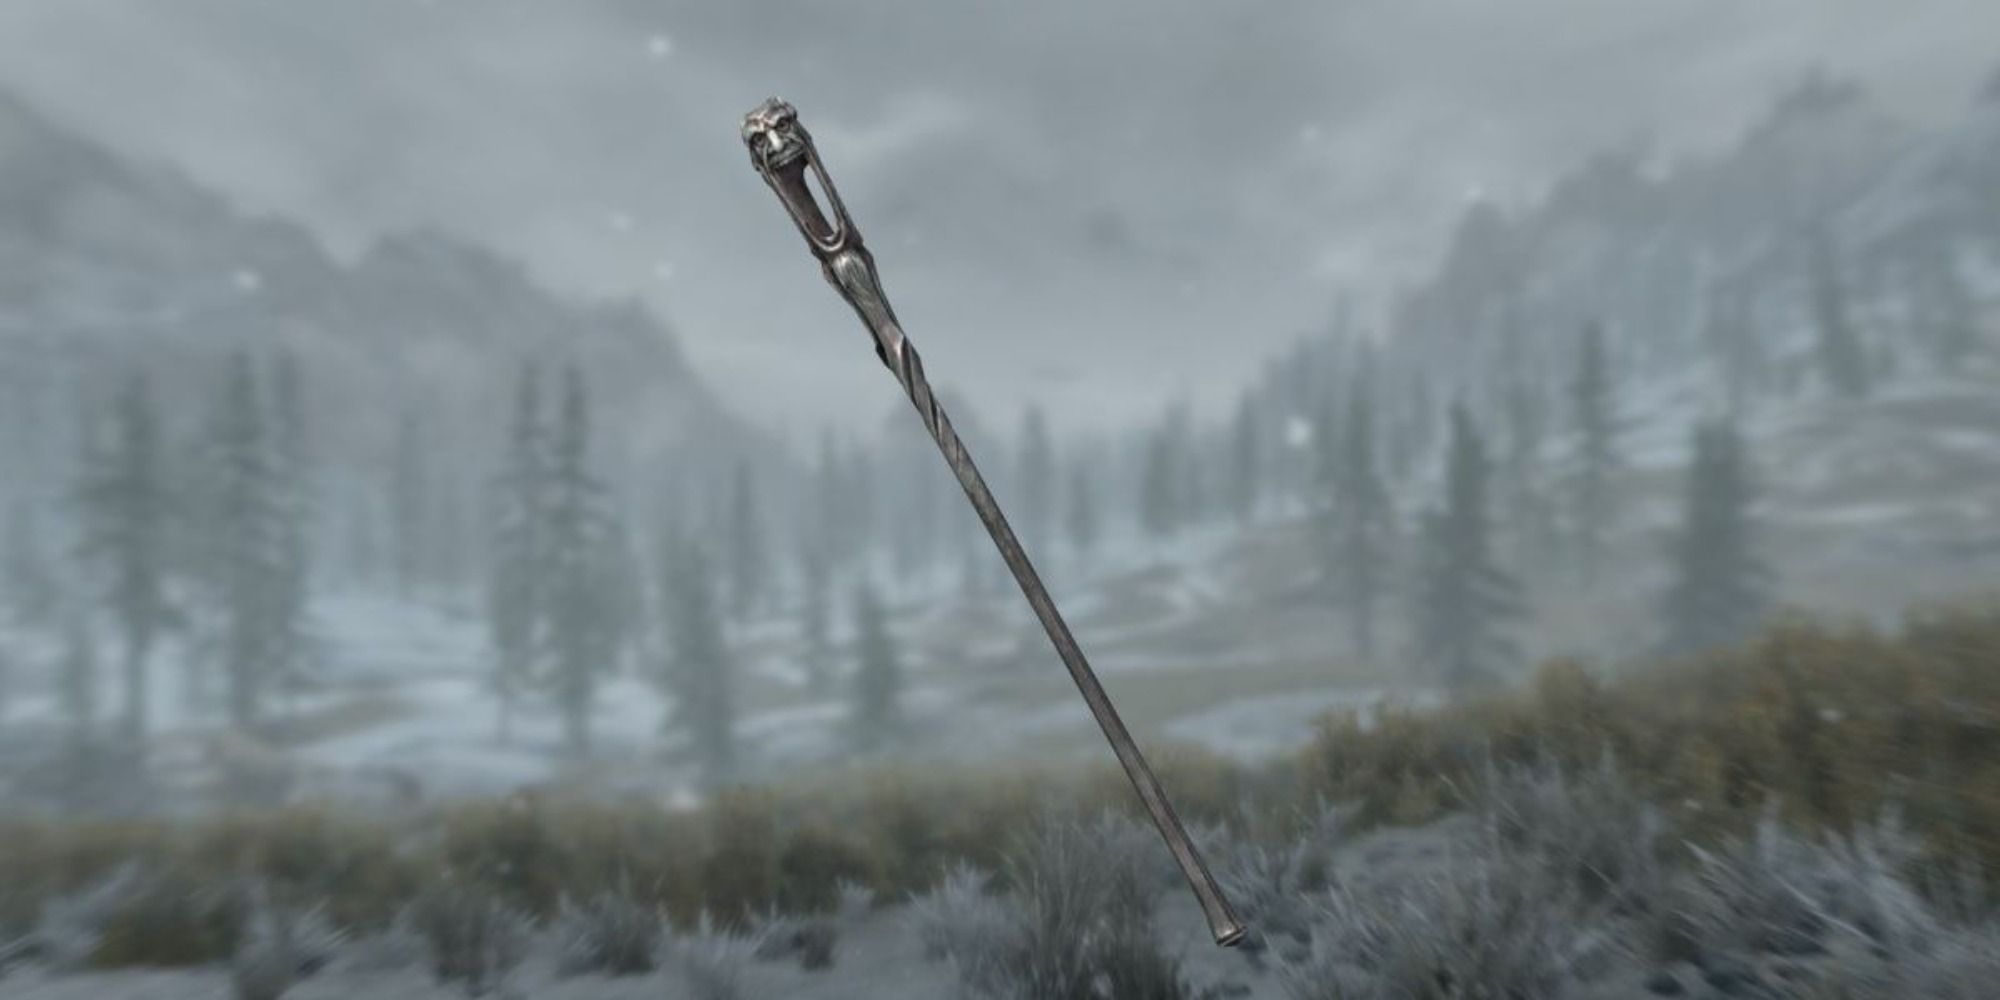 A screenshot showing the Wabbajack, a long staff made of black metal and decorated with a grotesque grinning face.